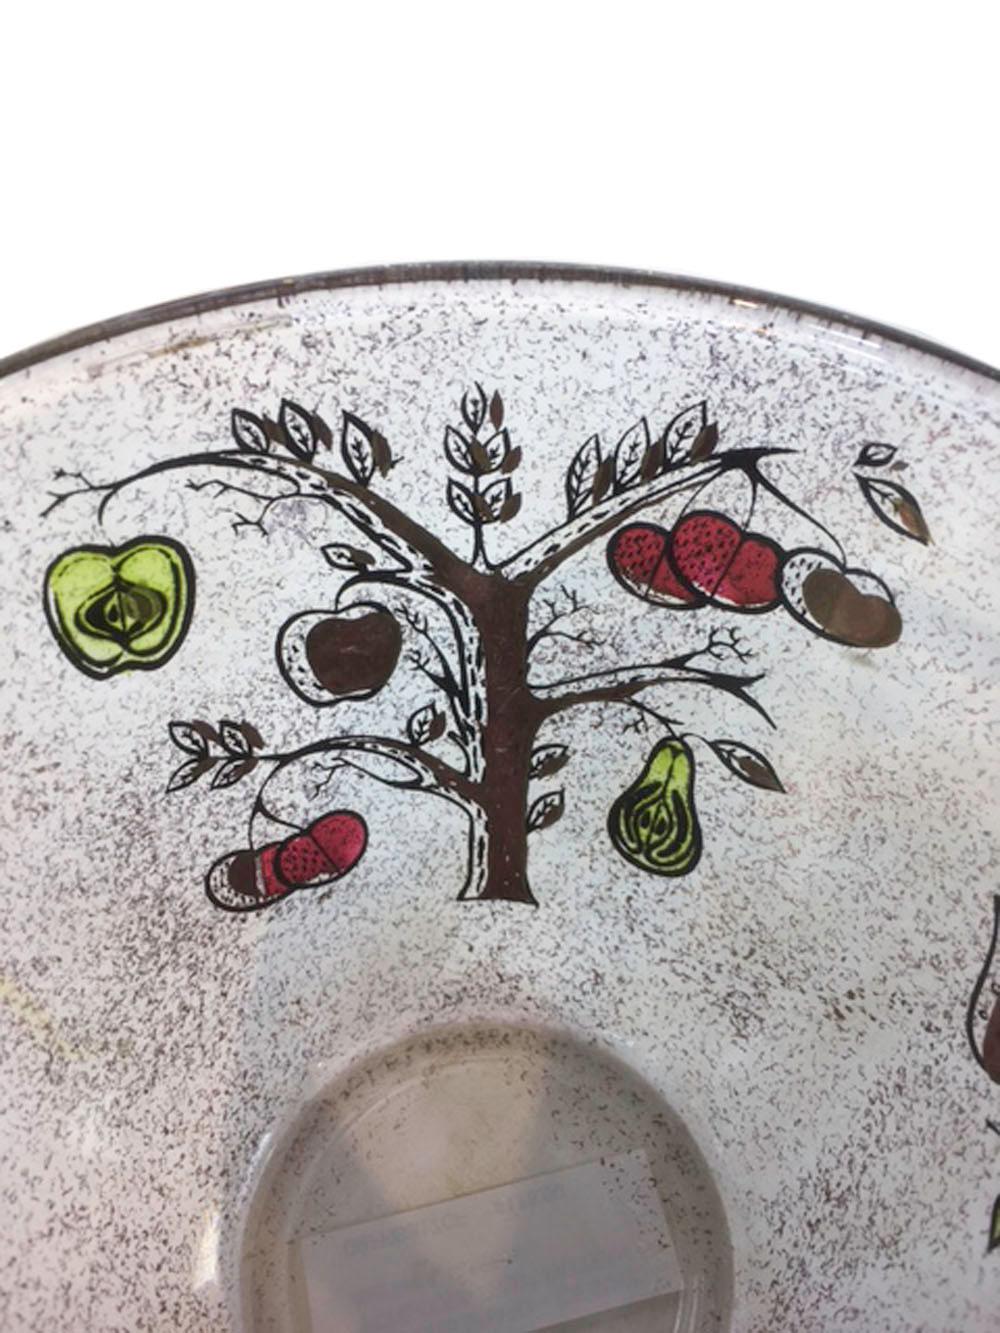 Enameled Mid-20th Century 17-Piece Cocktail / Barware Set in 'Tree of Life' Pattern For Sale